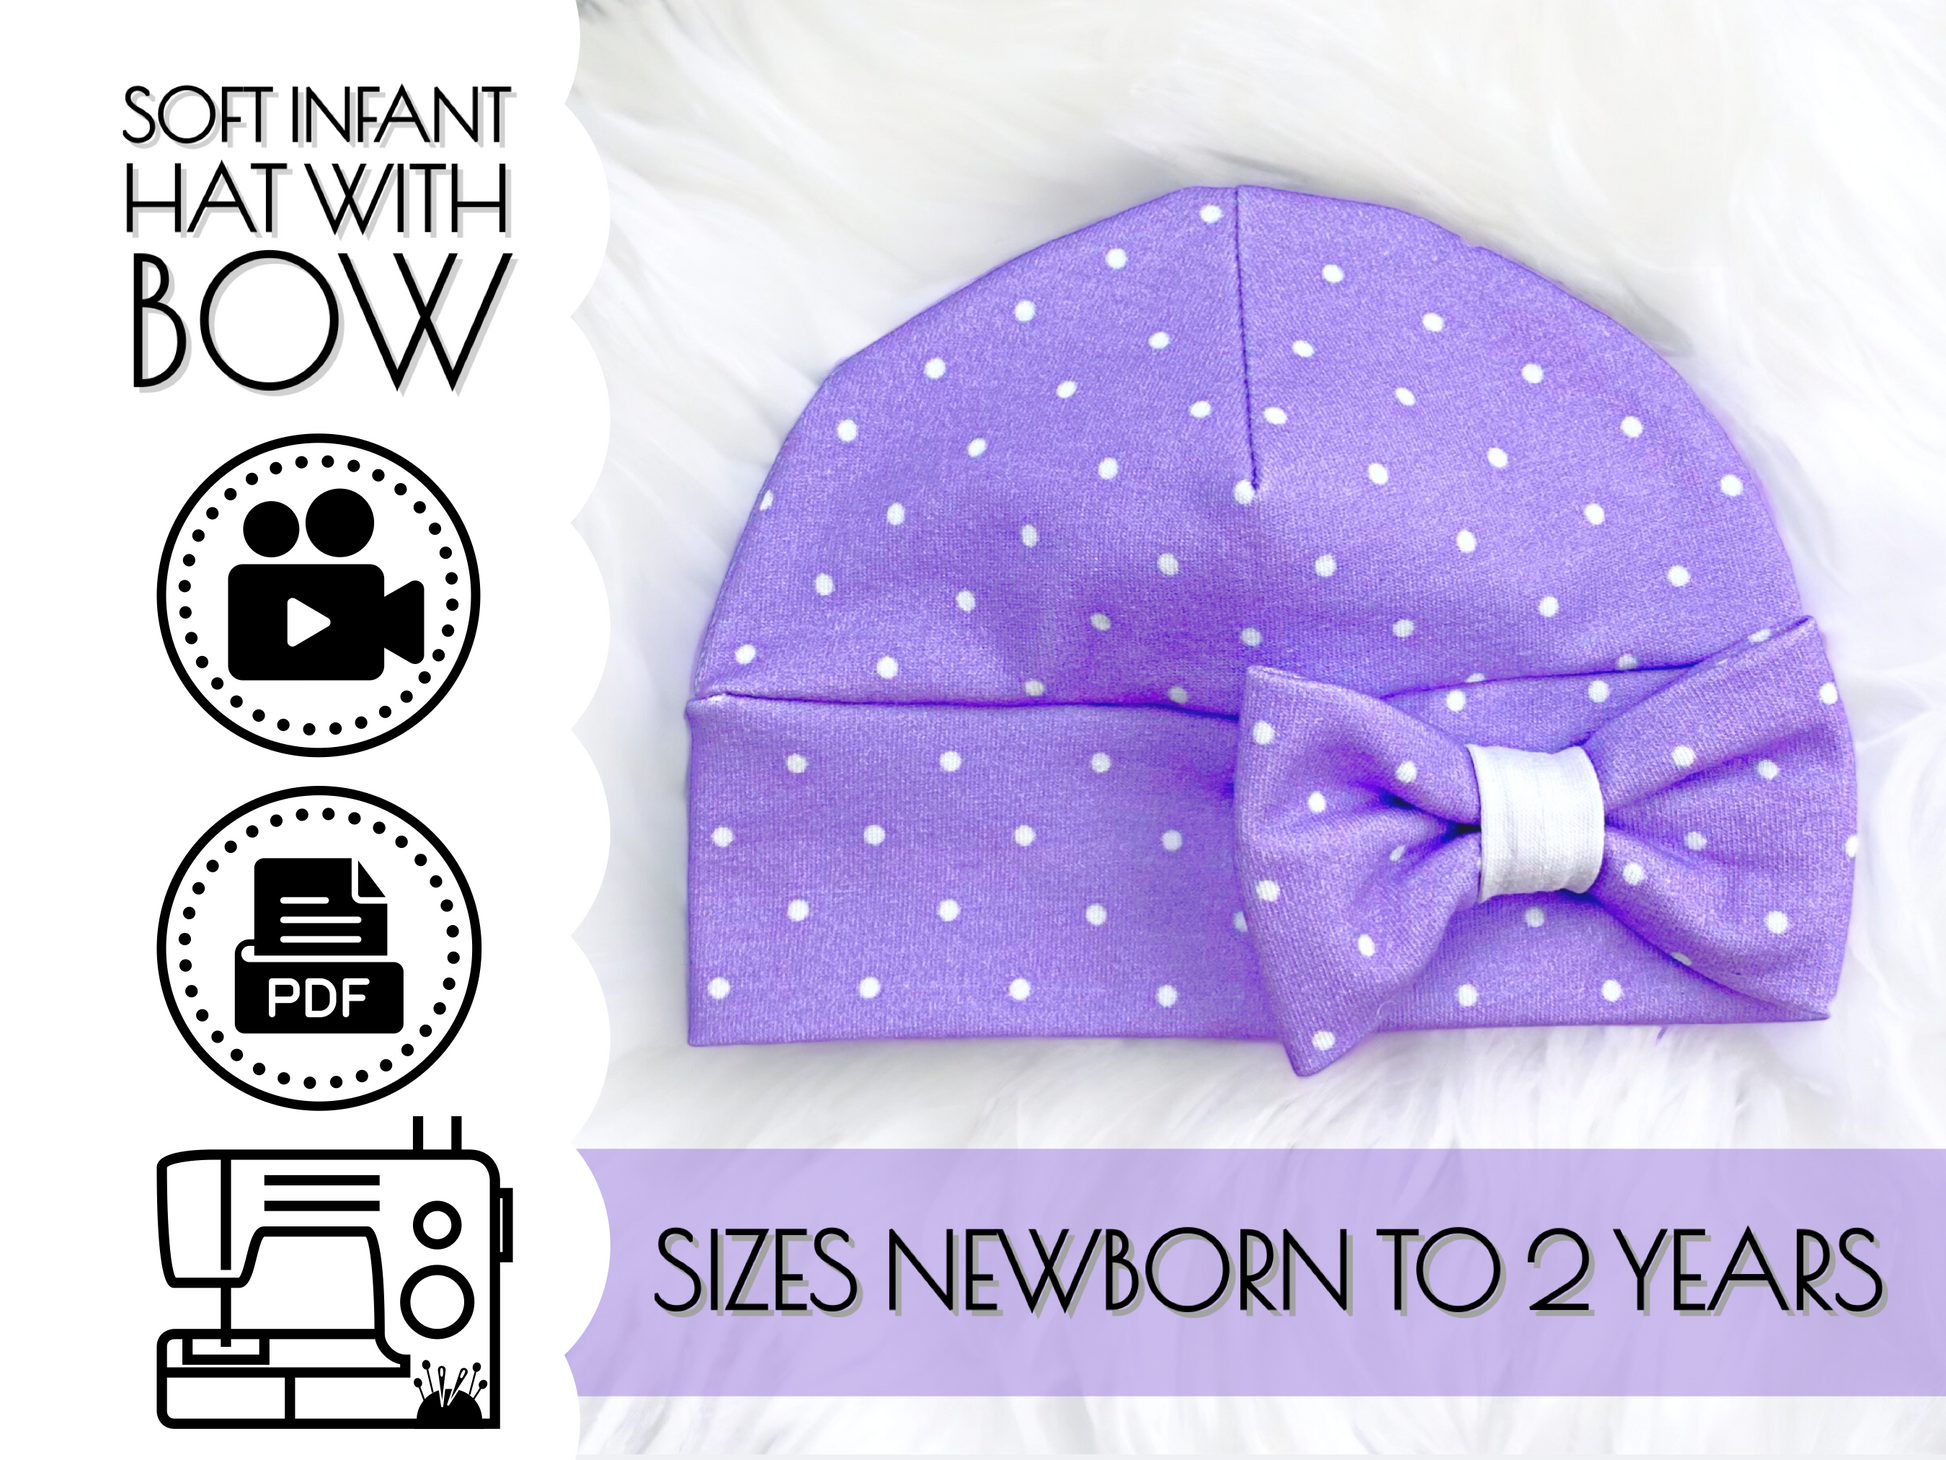 how to sew a newborn baby infant hat with a bow, hospital hat, boy or girl, easy knit sewing patterns for baby, serger sewing, aloha sewing company tutorials